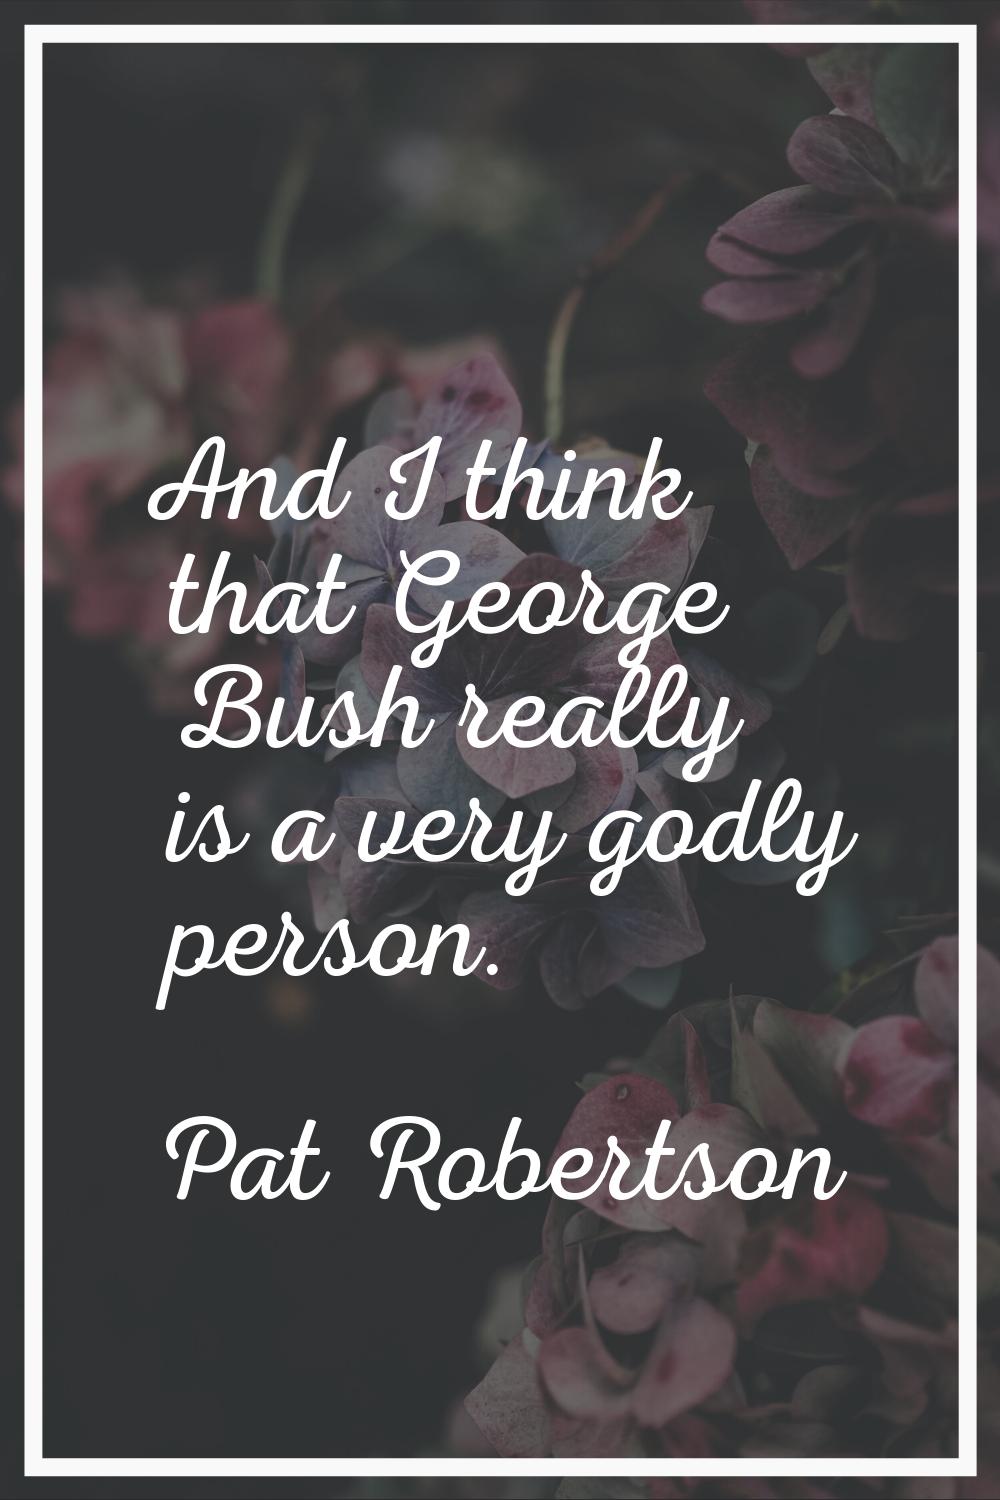 And I think that George Bush really is a very godly person.